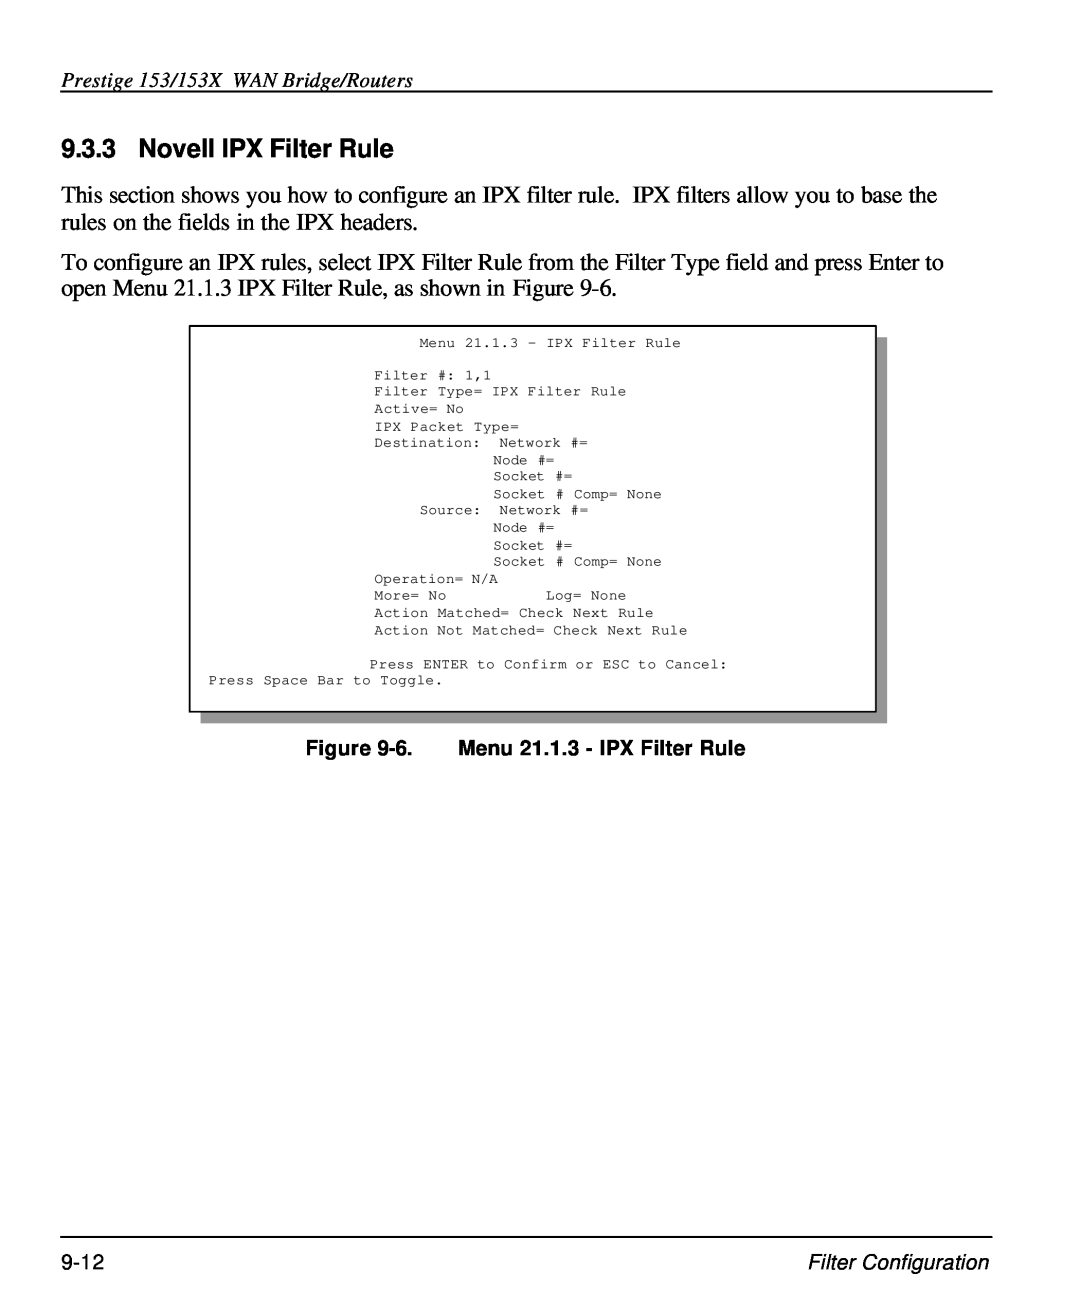 ZyXEL Communications 153X user manual Novell IPX Filter Rule, 6. Menu 21.1.3 - IPX Filter Rule 